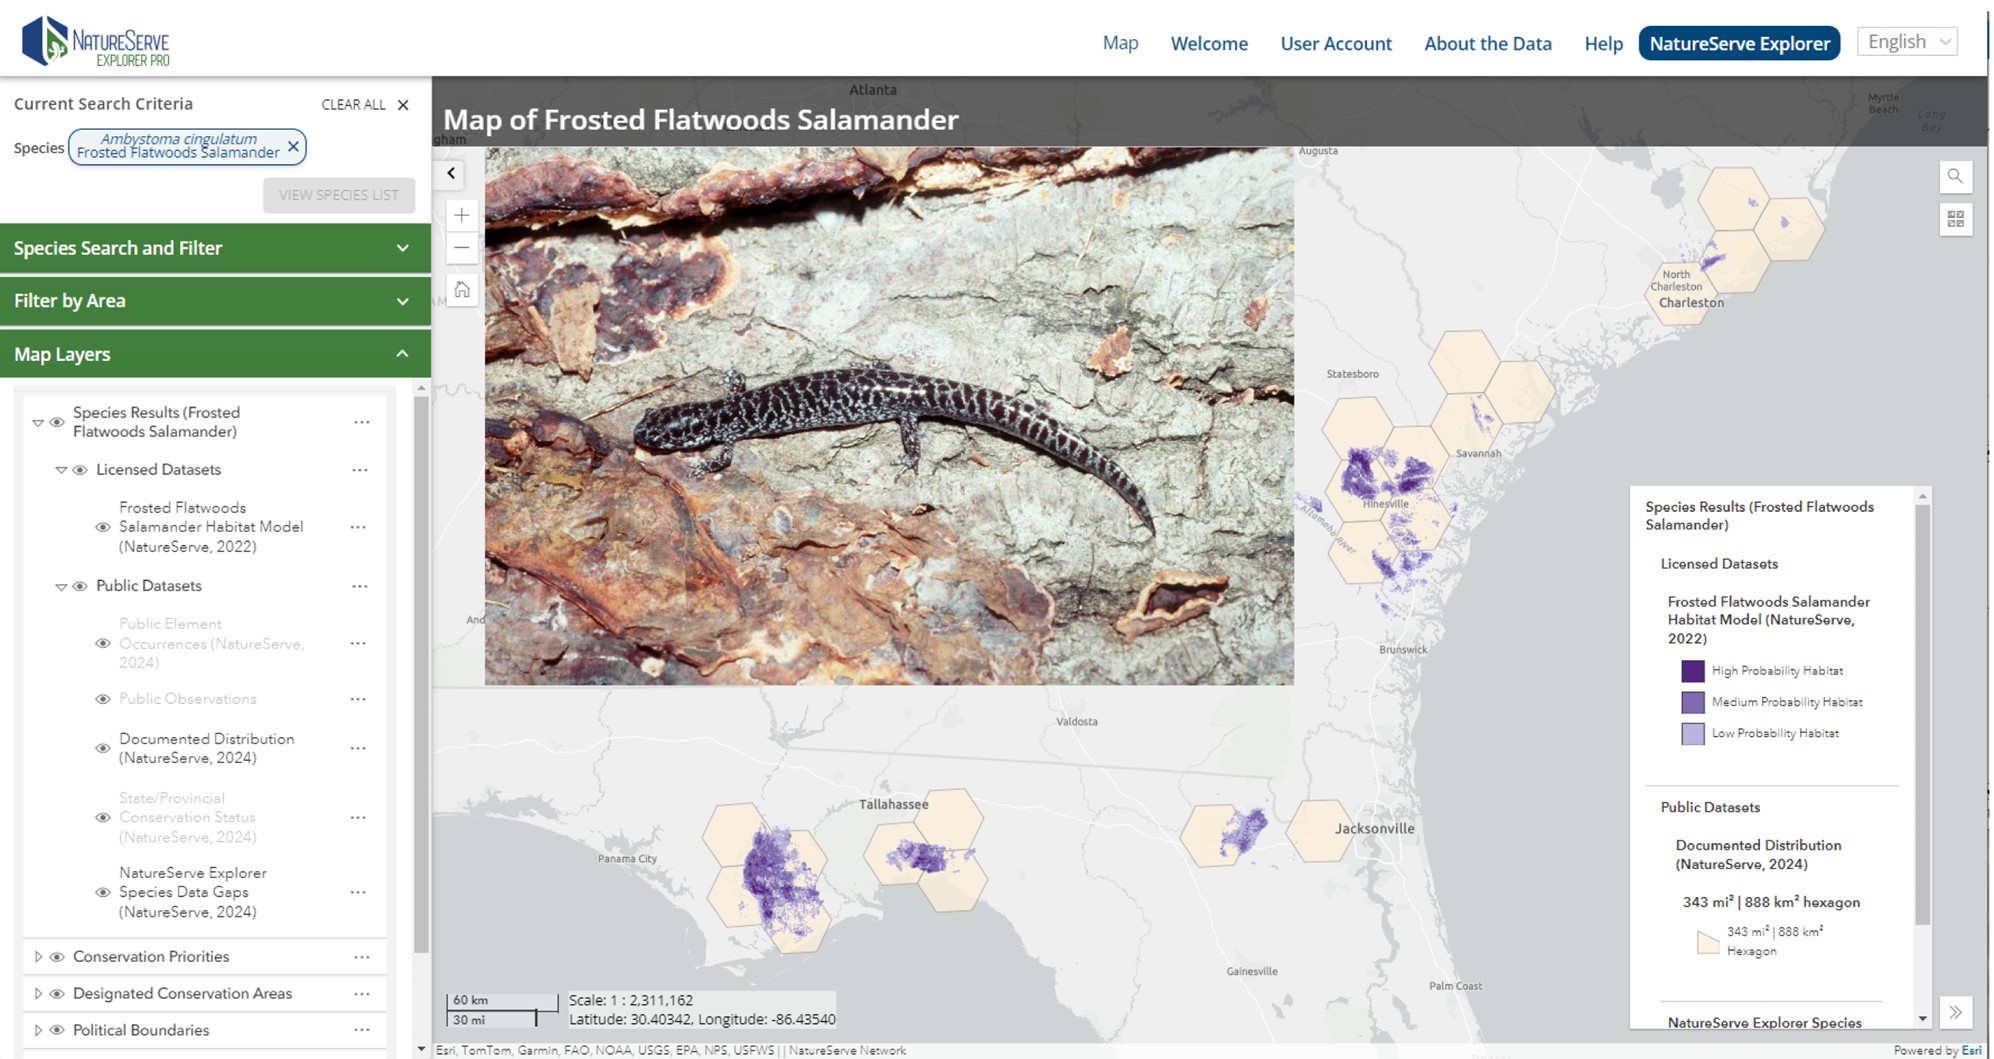 A map of Frosted Flatwoods Salamander predicted habitat with an inset photo of a spotted salamander.